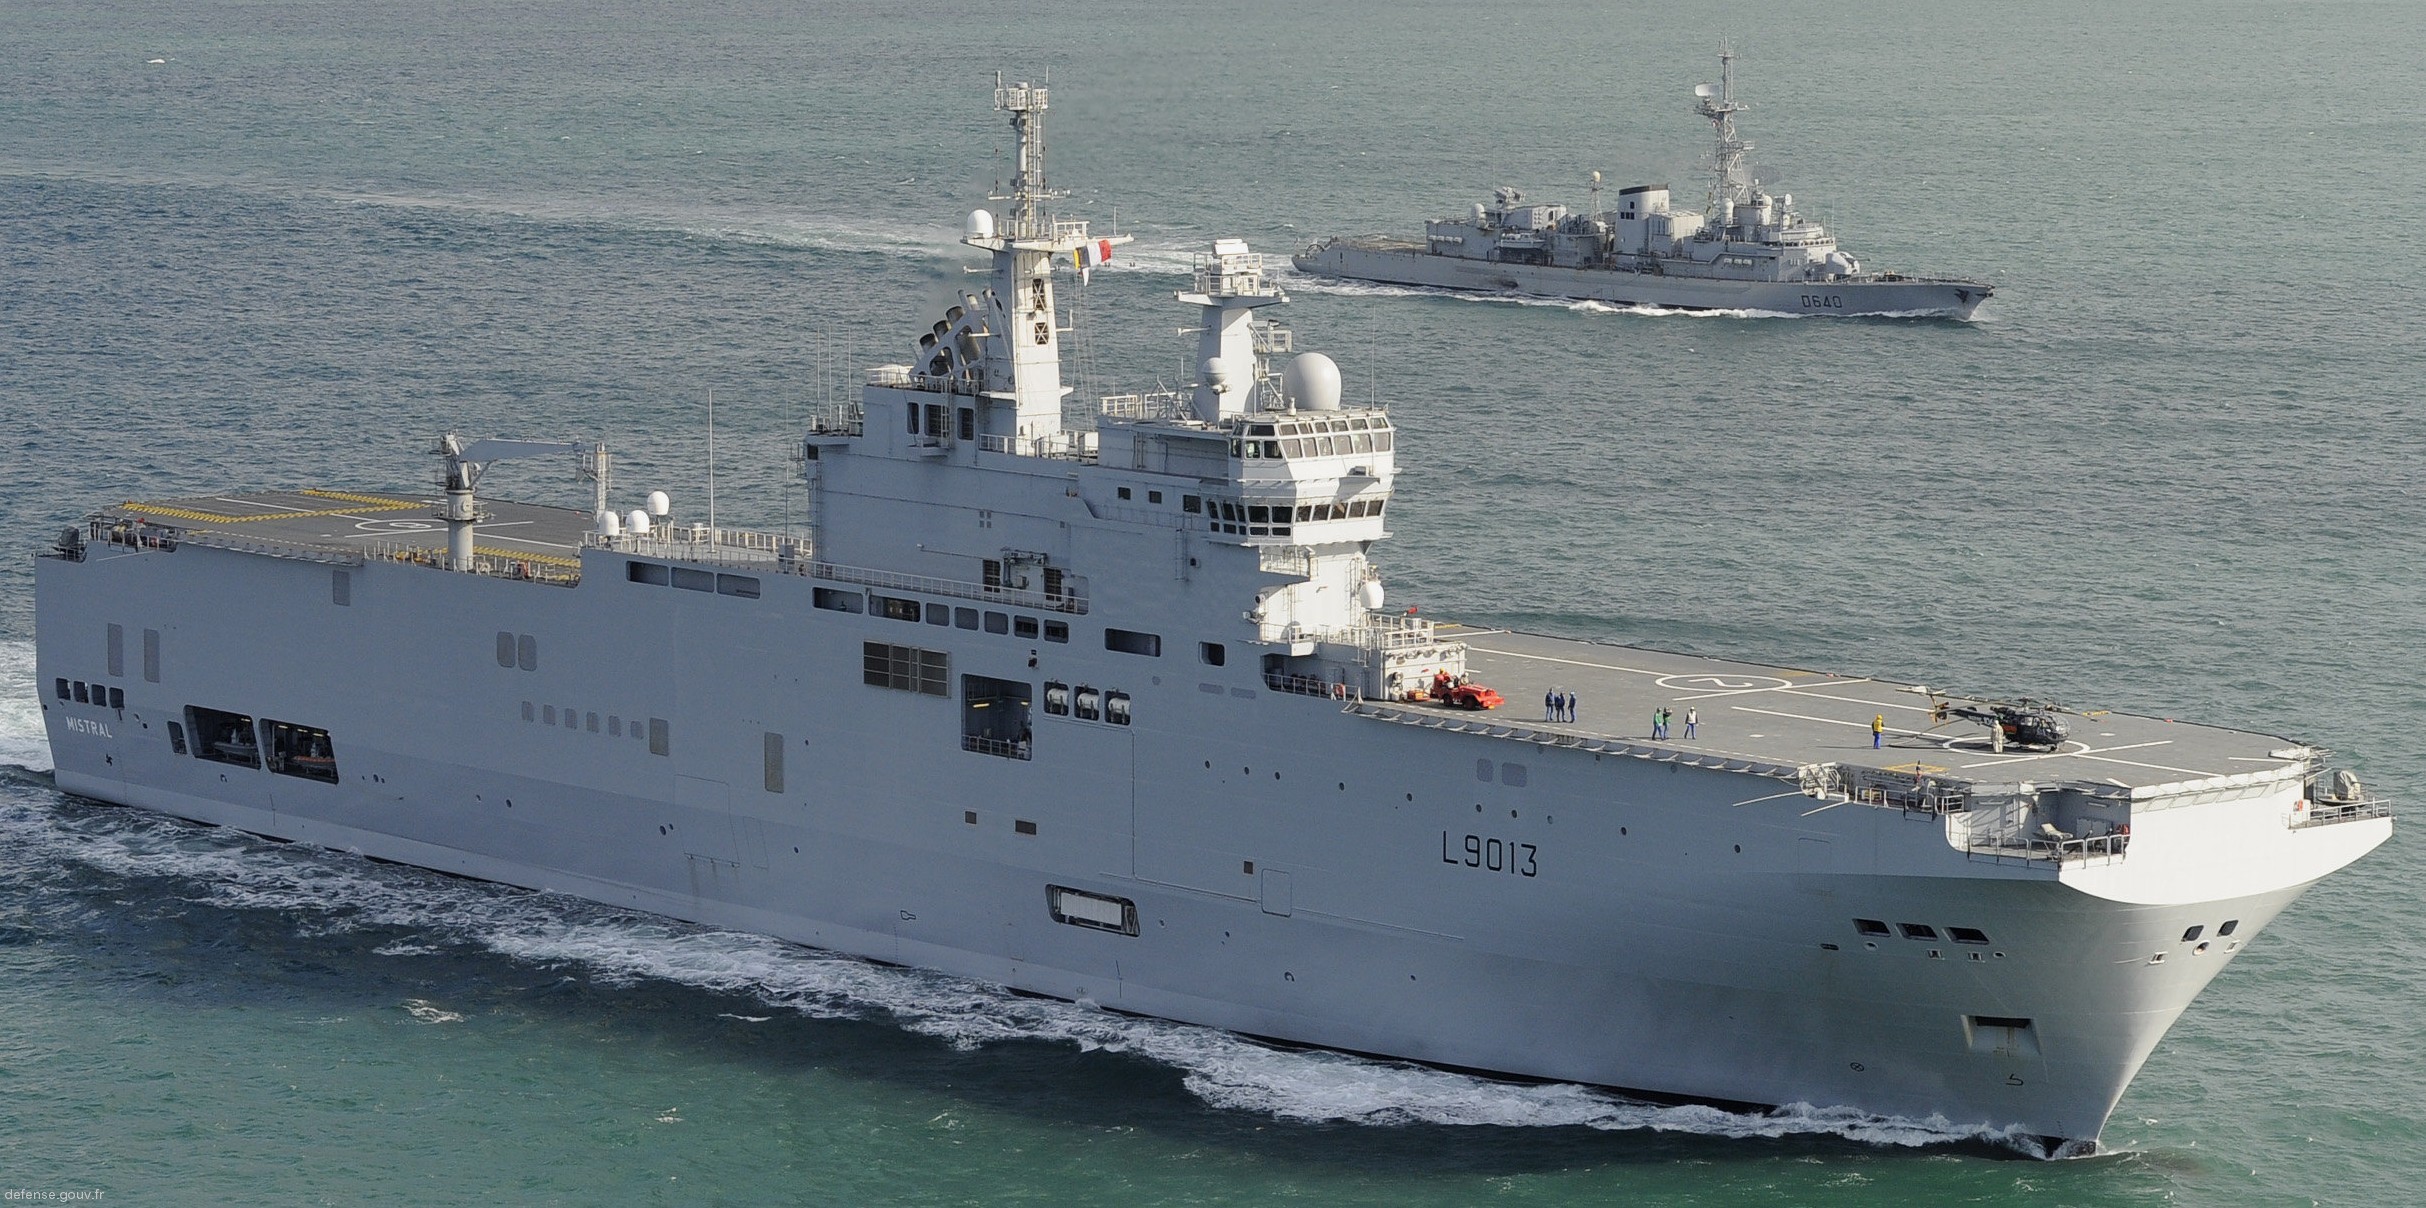 l-9013 fs mistral amphibious assault command ship french navy marine nationale 23